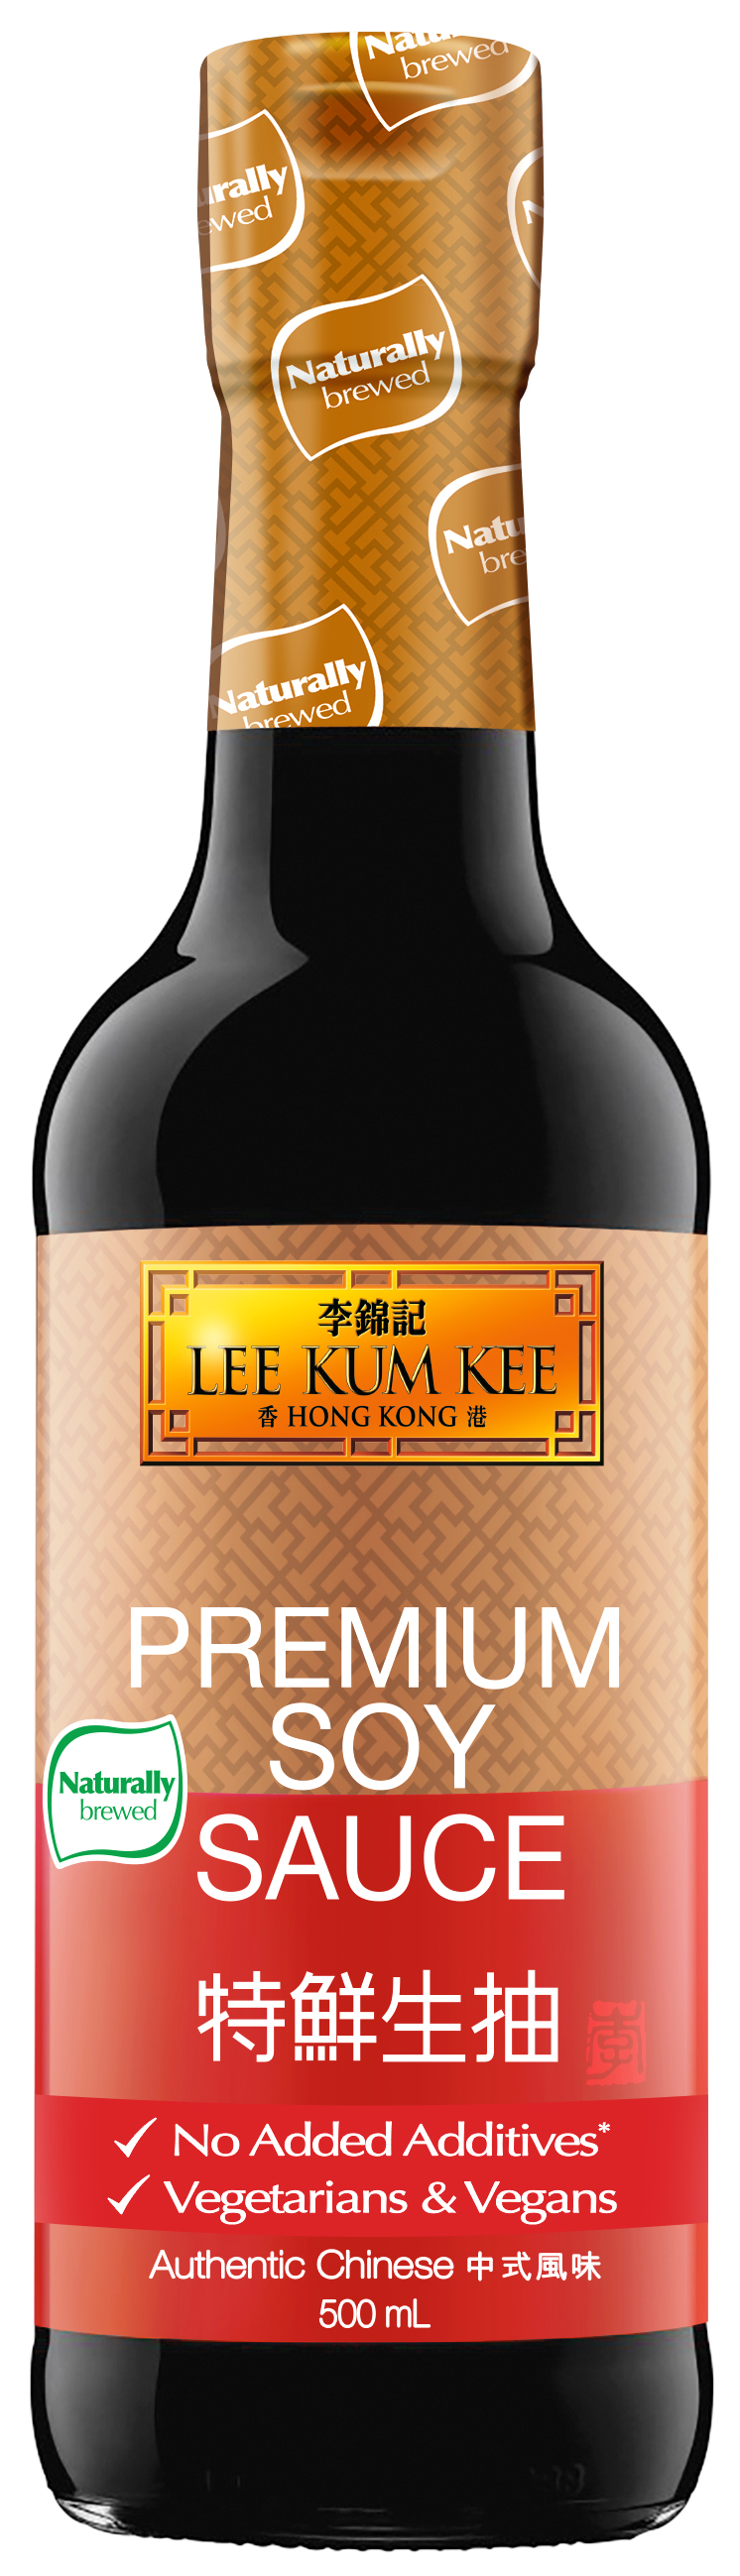 Premium Soy Sauce 500 ml naturally brewed icon